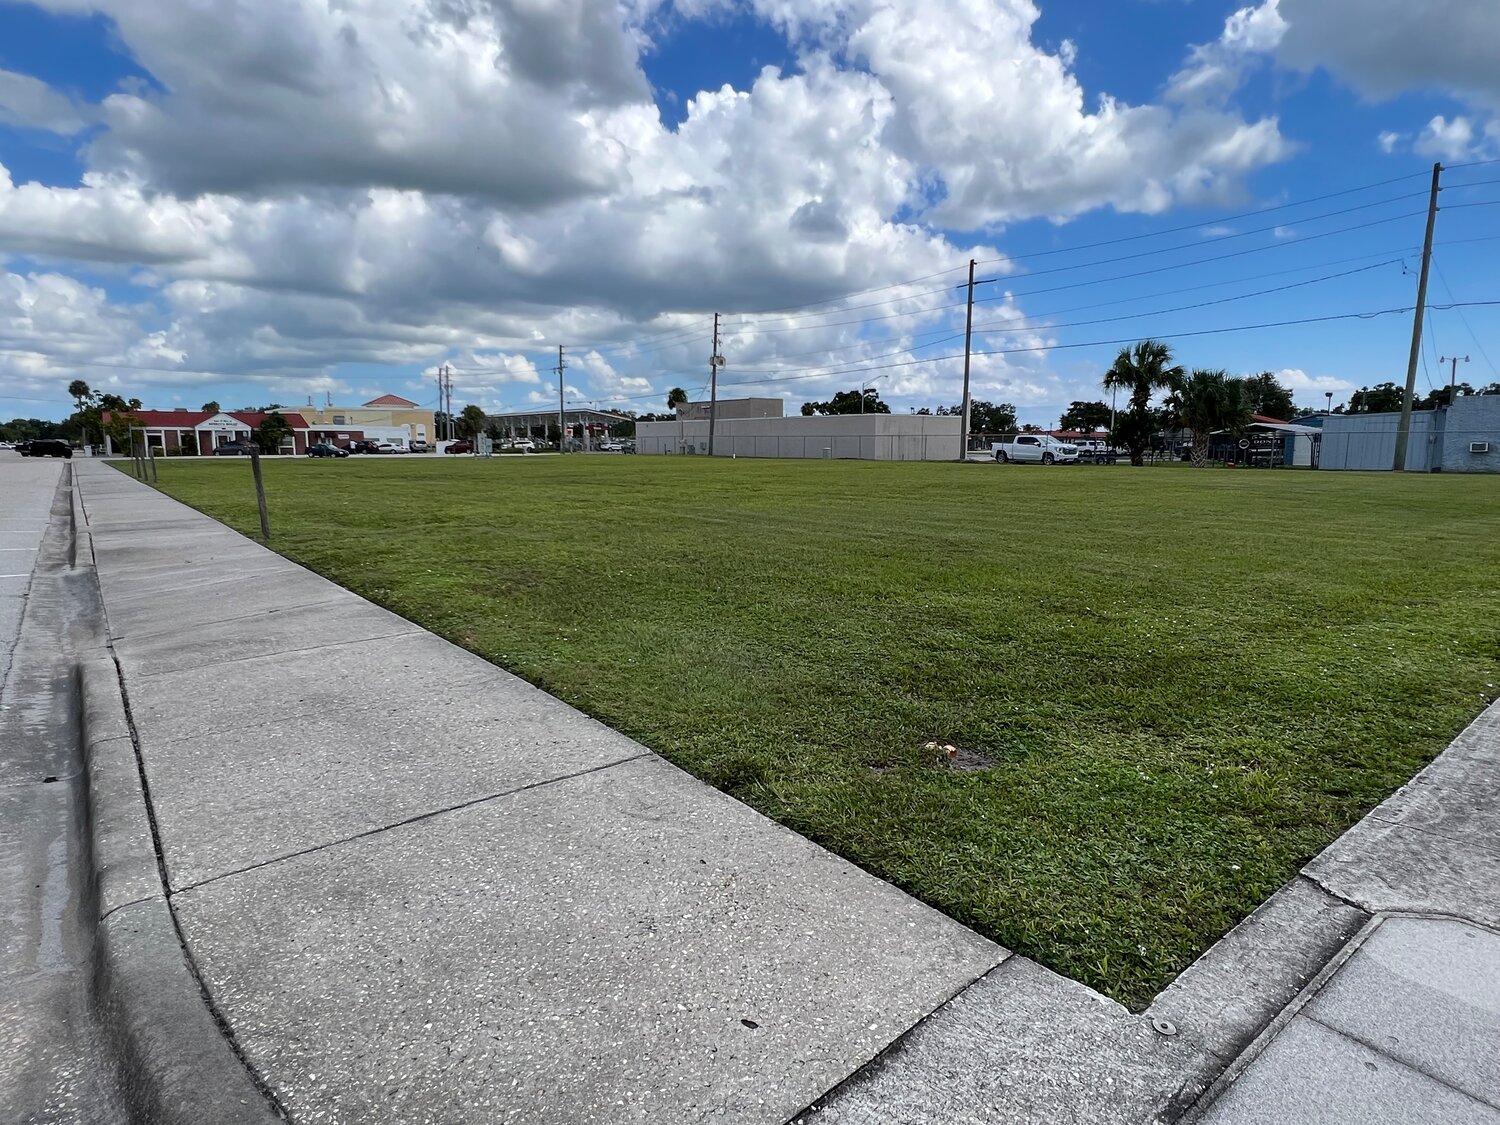 The lot across the street from the Historic Okeechobee County Courthouse is vacant. At one time, it was site of the old Supervisor of Elections Office and Teen Town. The side of the lot next to the alley between this lot at the businesses on SR 70 is fenced.